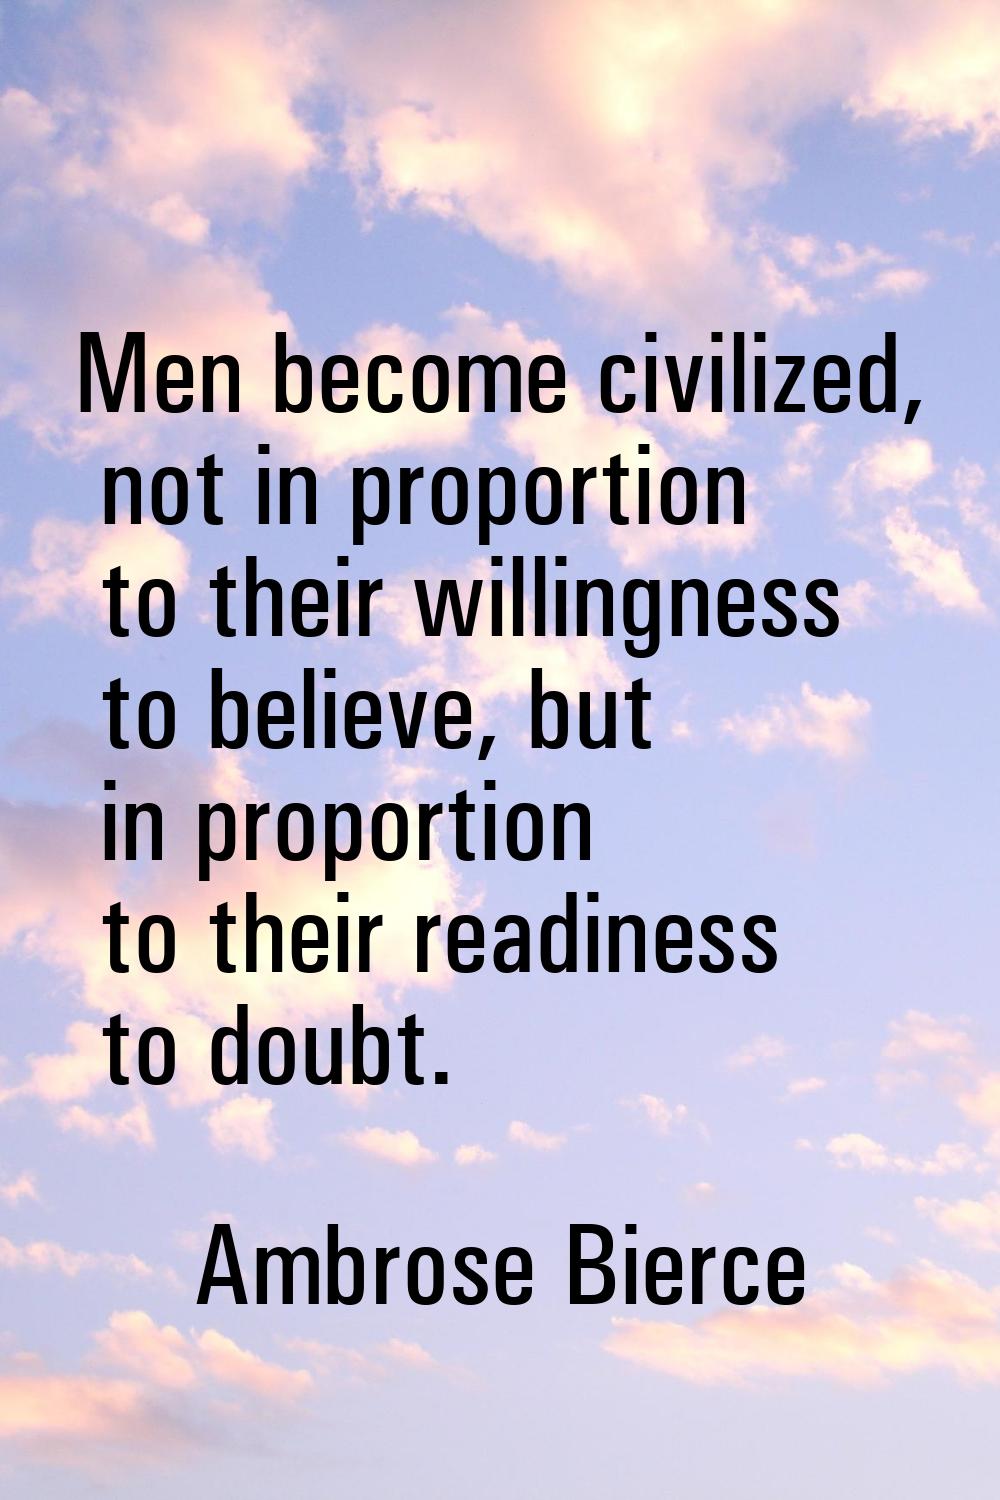 Men become civilized, not in proportion to their willingness to believe, but in proportion to their